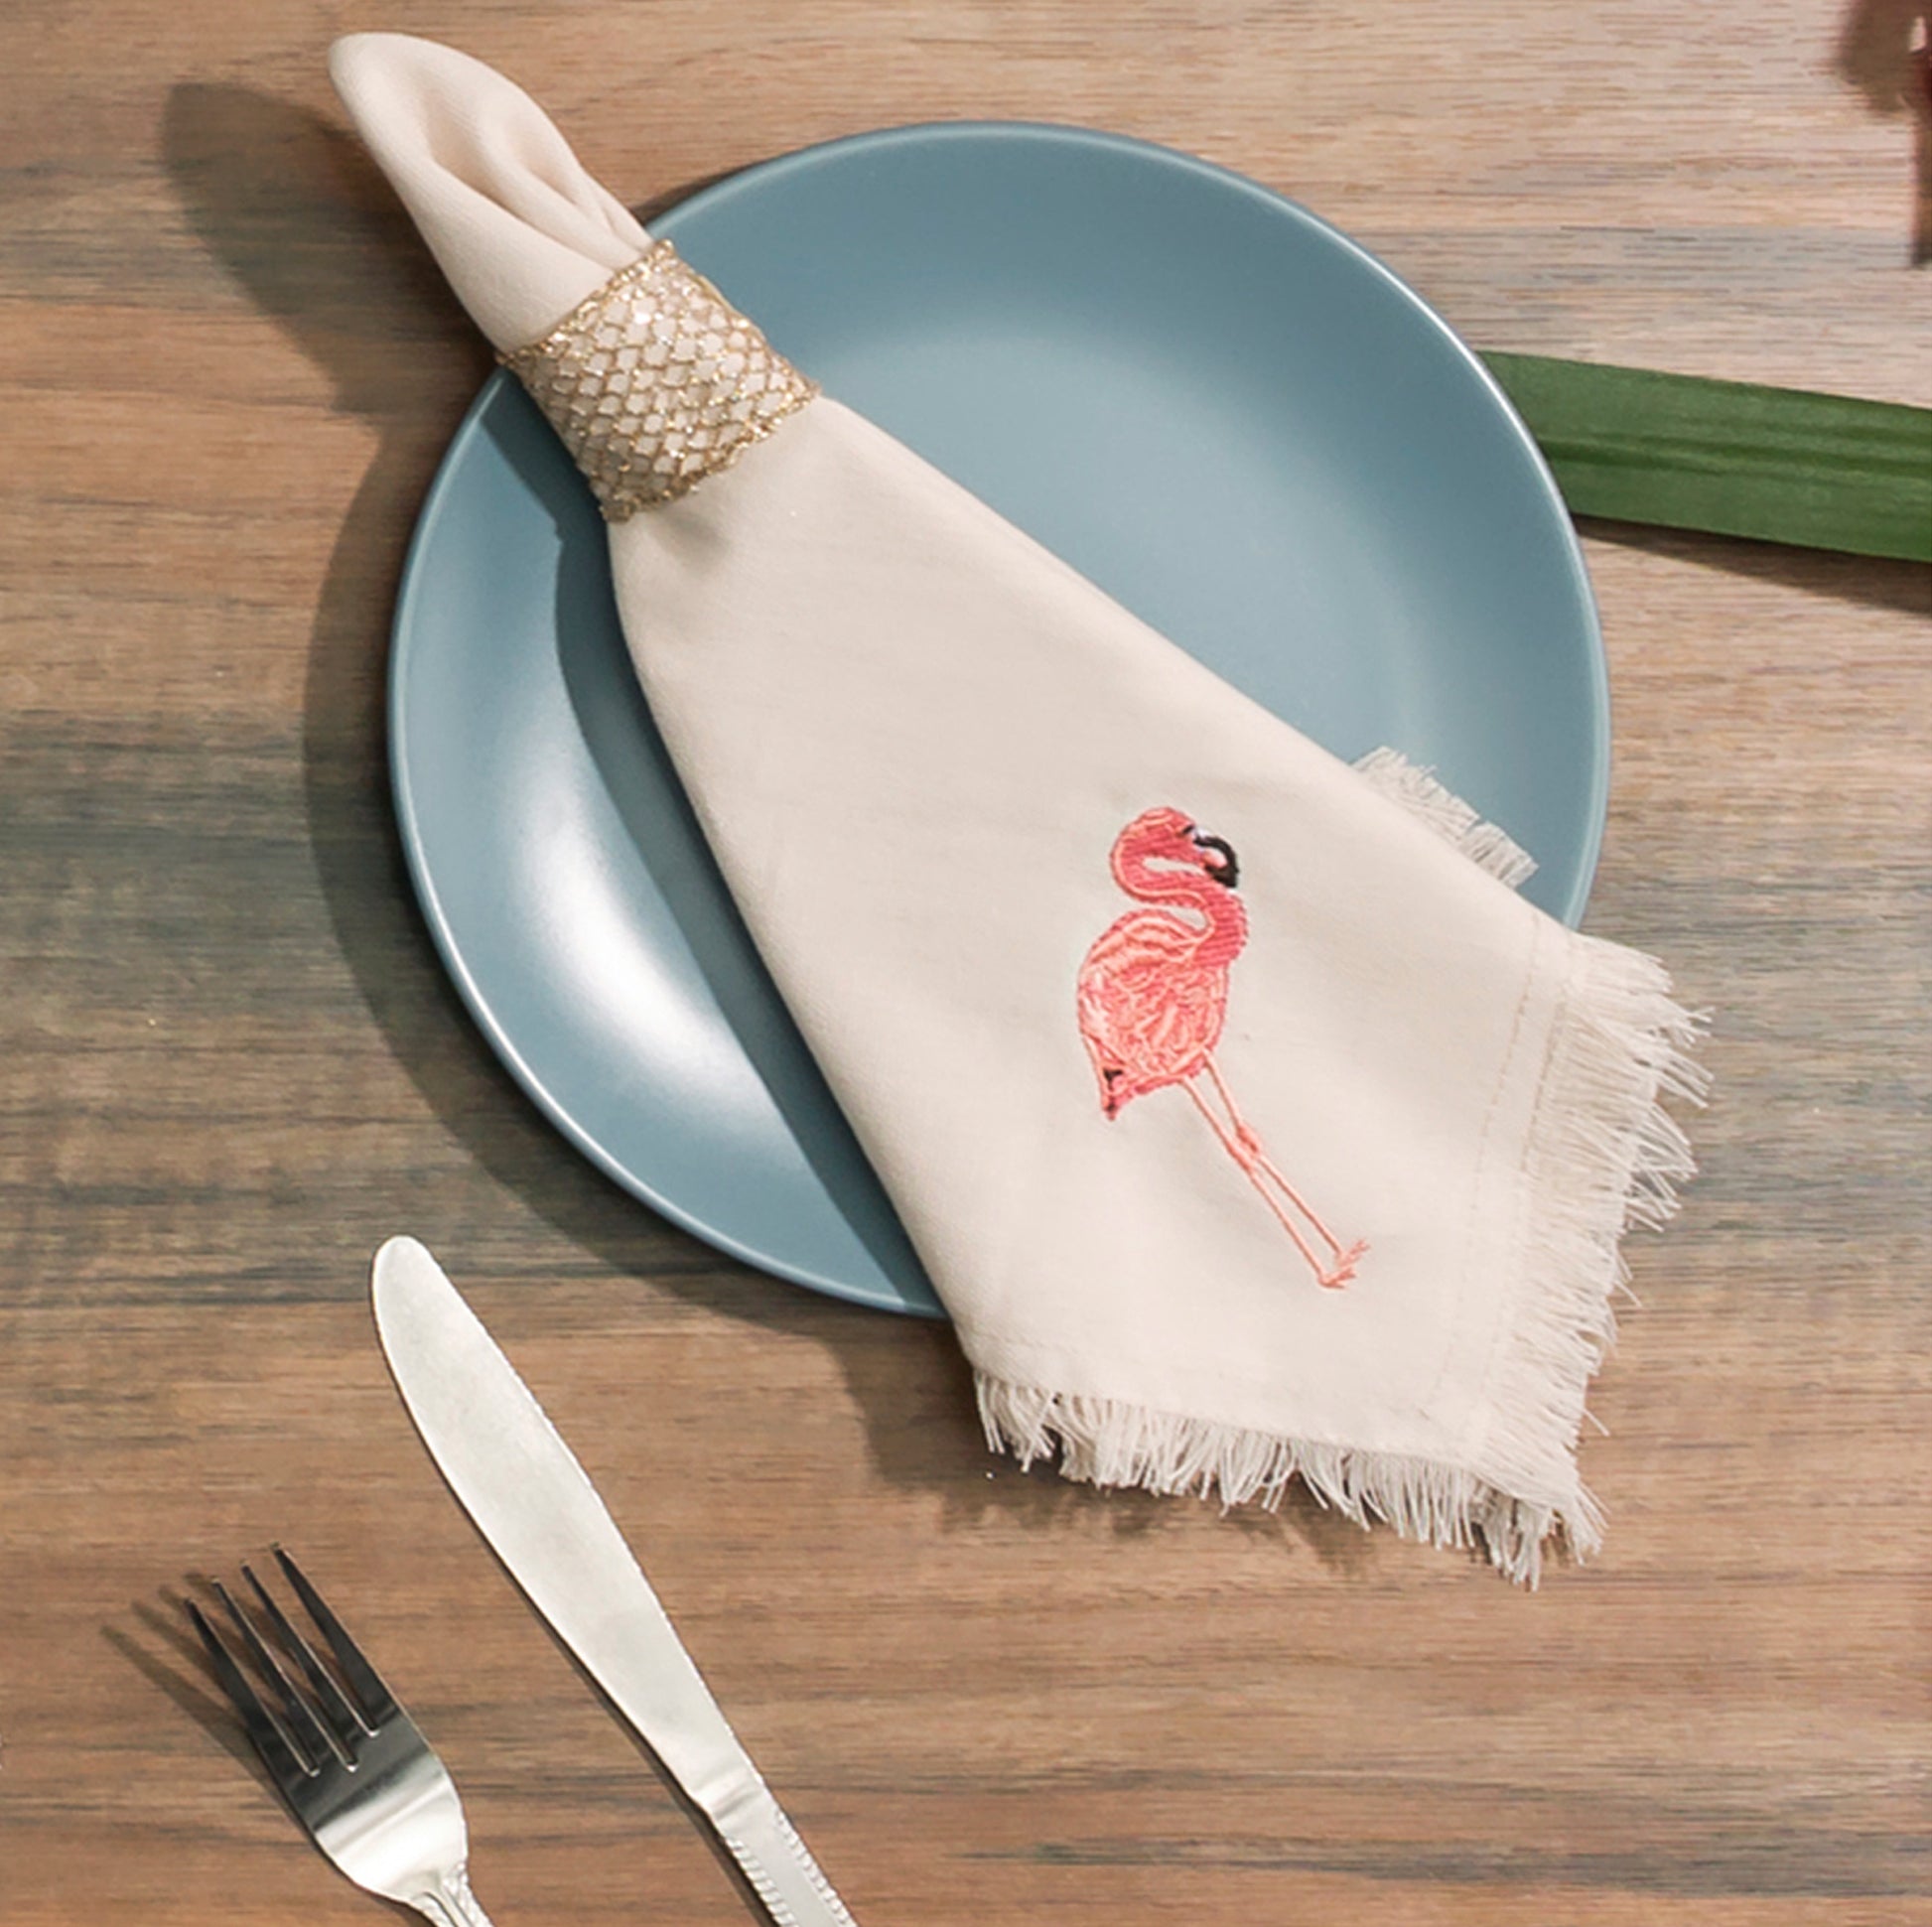 Napkin depicting embroidered Pink Flamingo on a tan cotton background with fringe edges. Napkin sitting on blue plate.